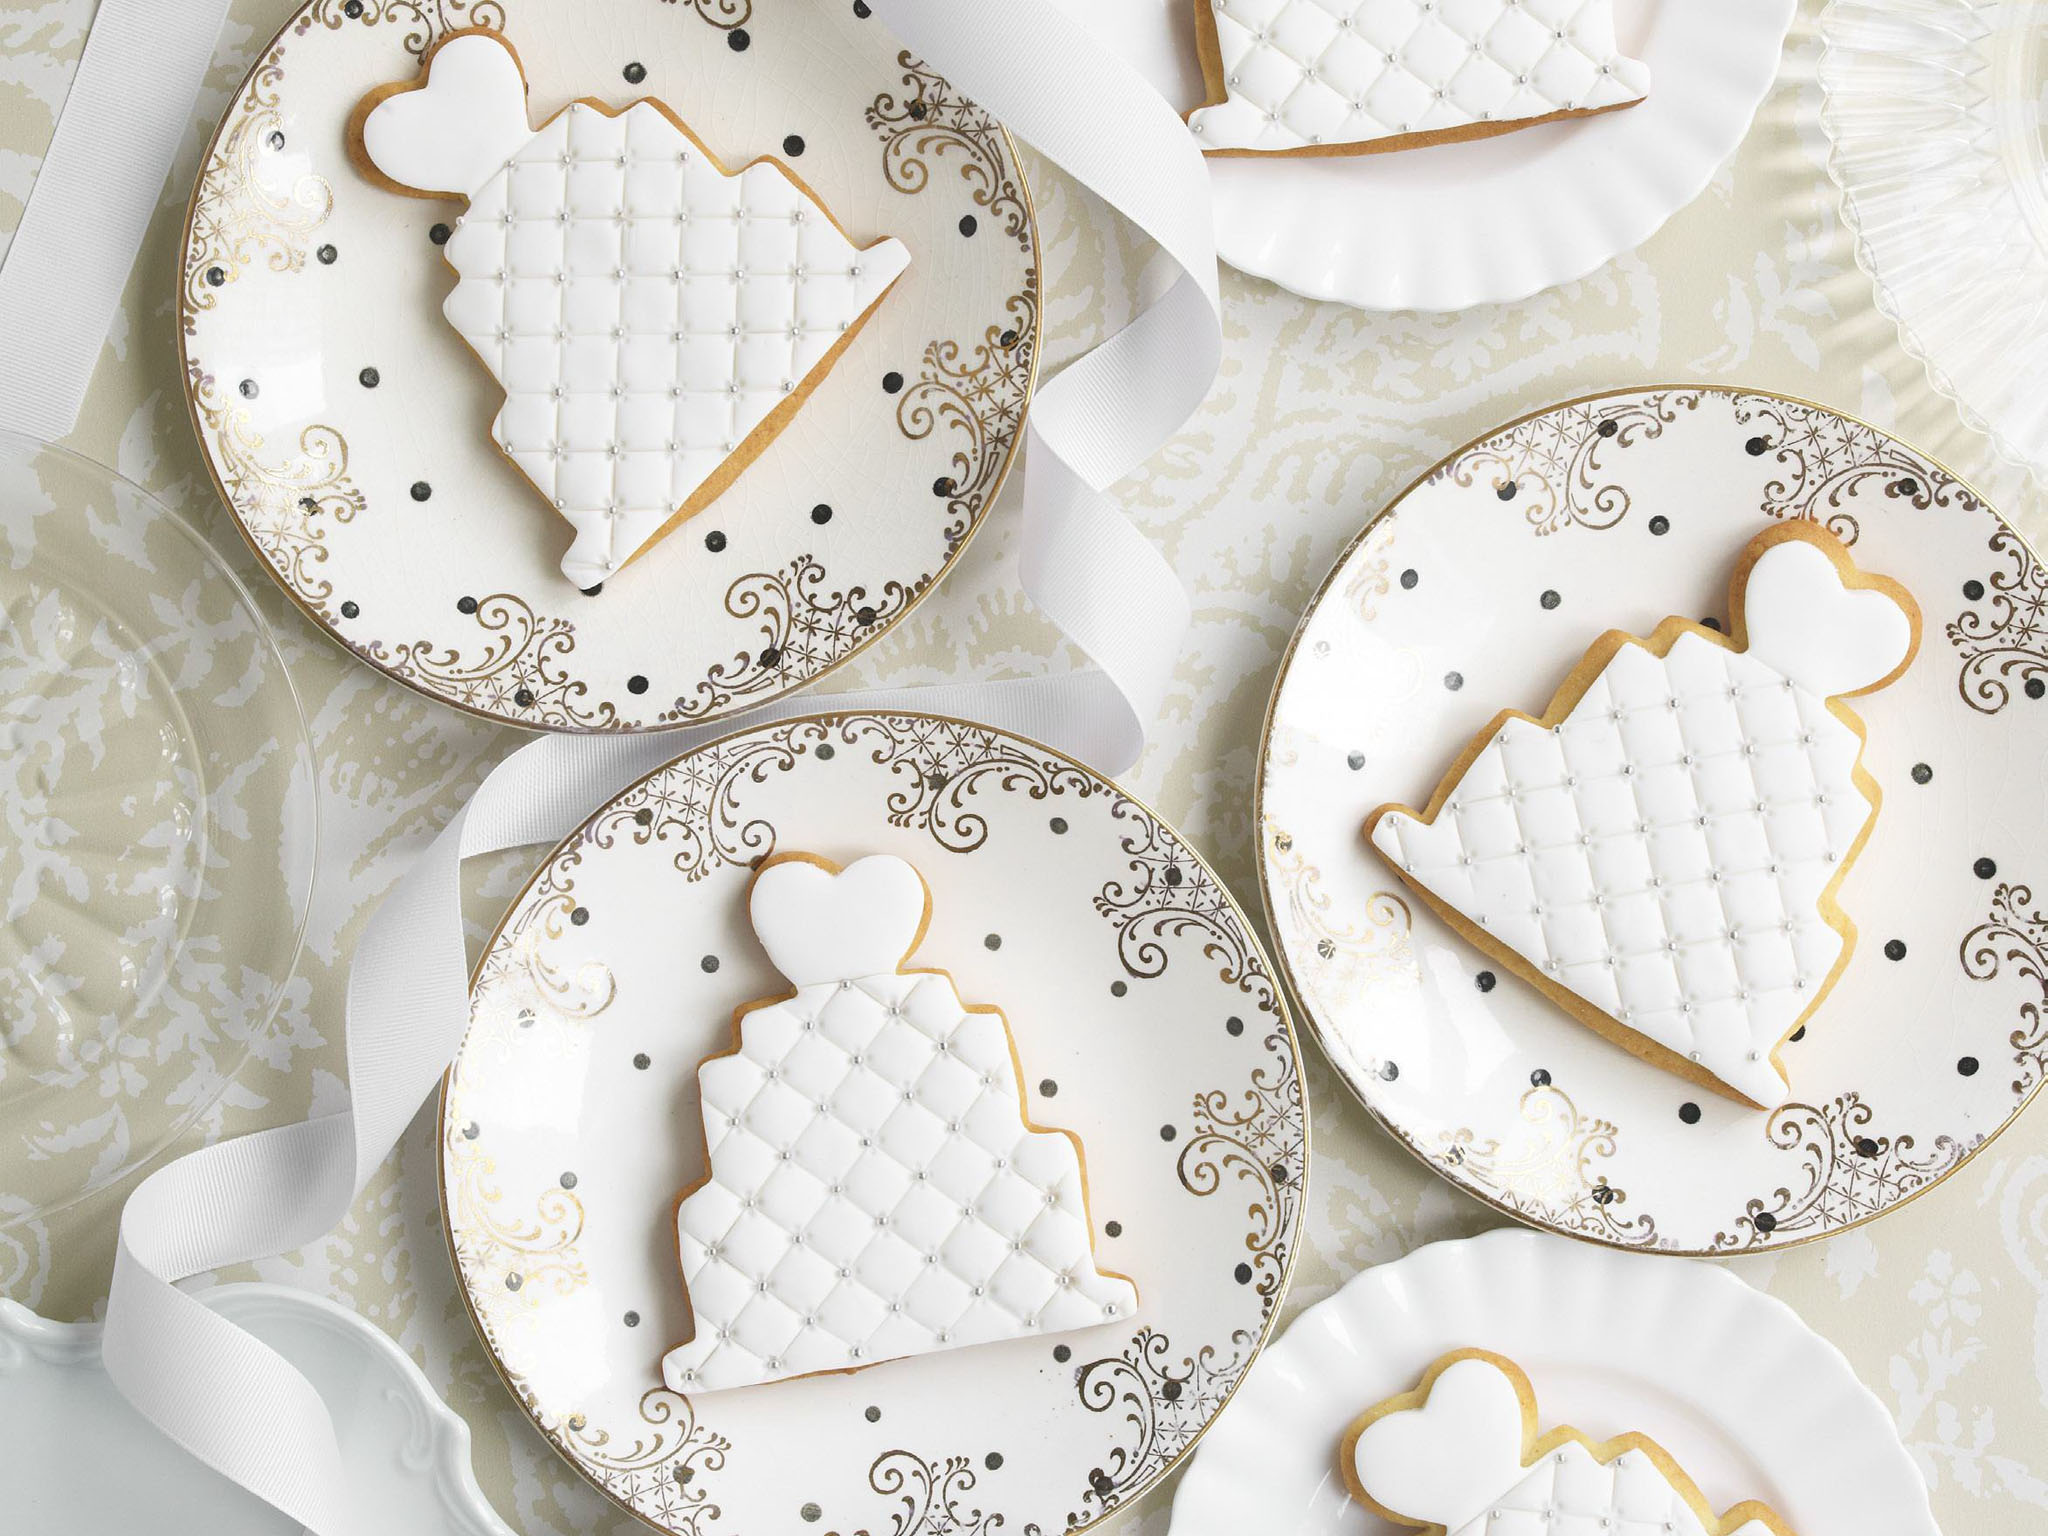 QUILTED WEDDING Cake Cookies